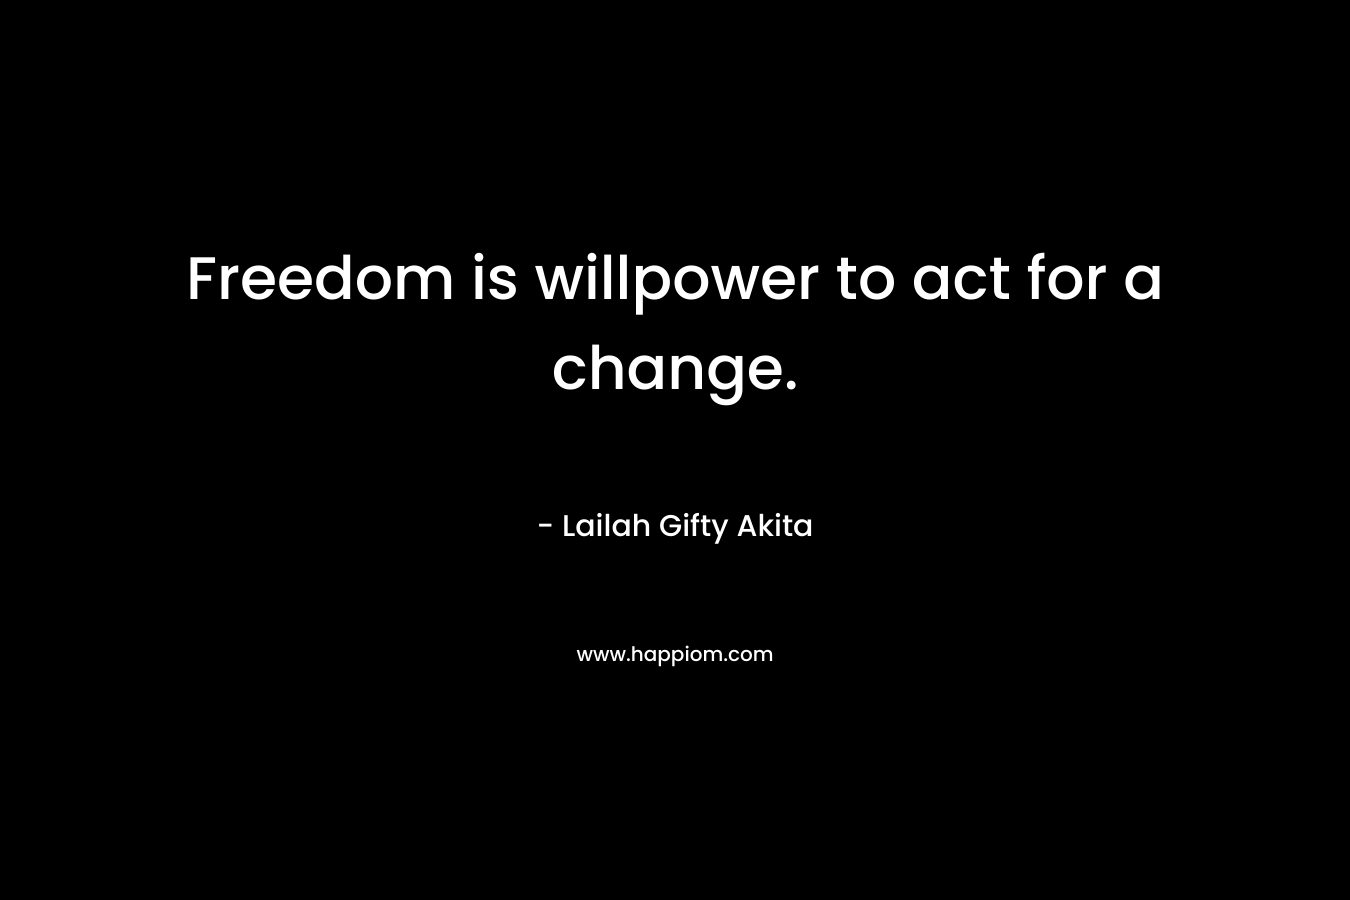 Freedom is willpower to act for a change.